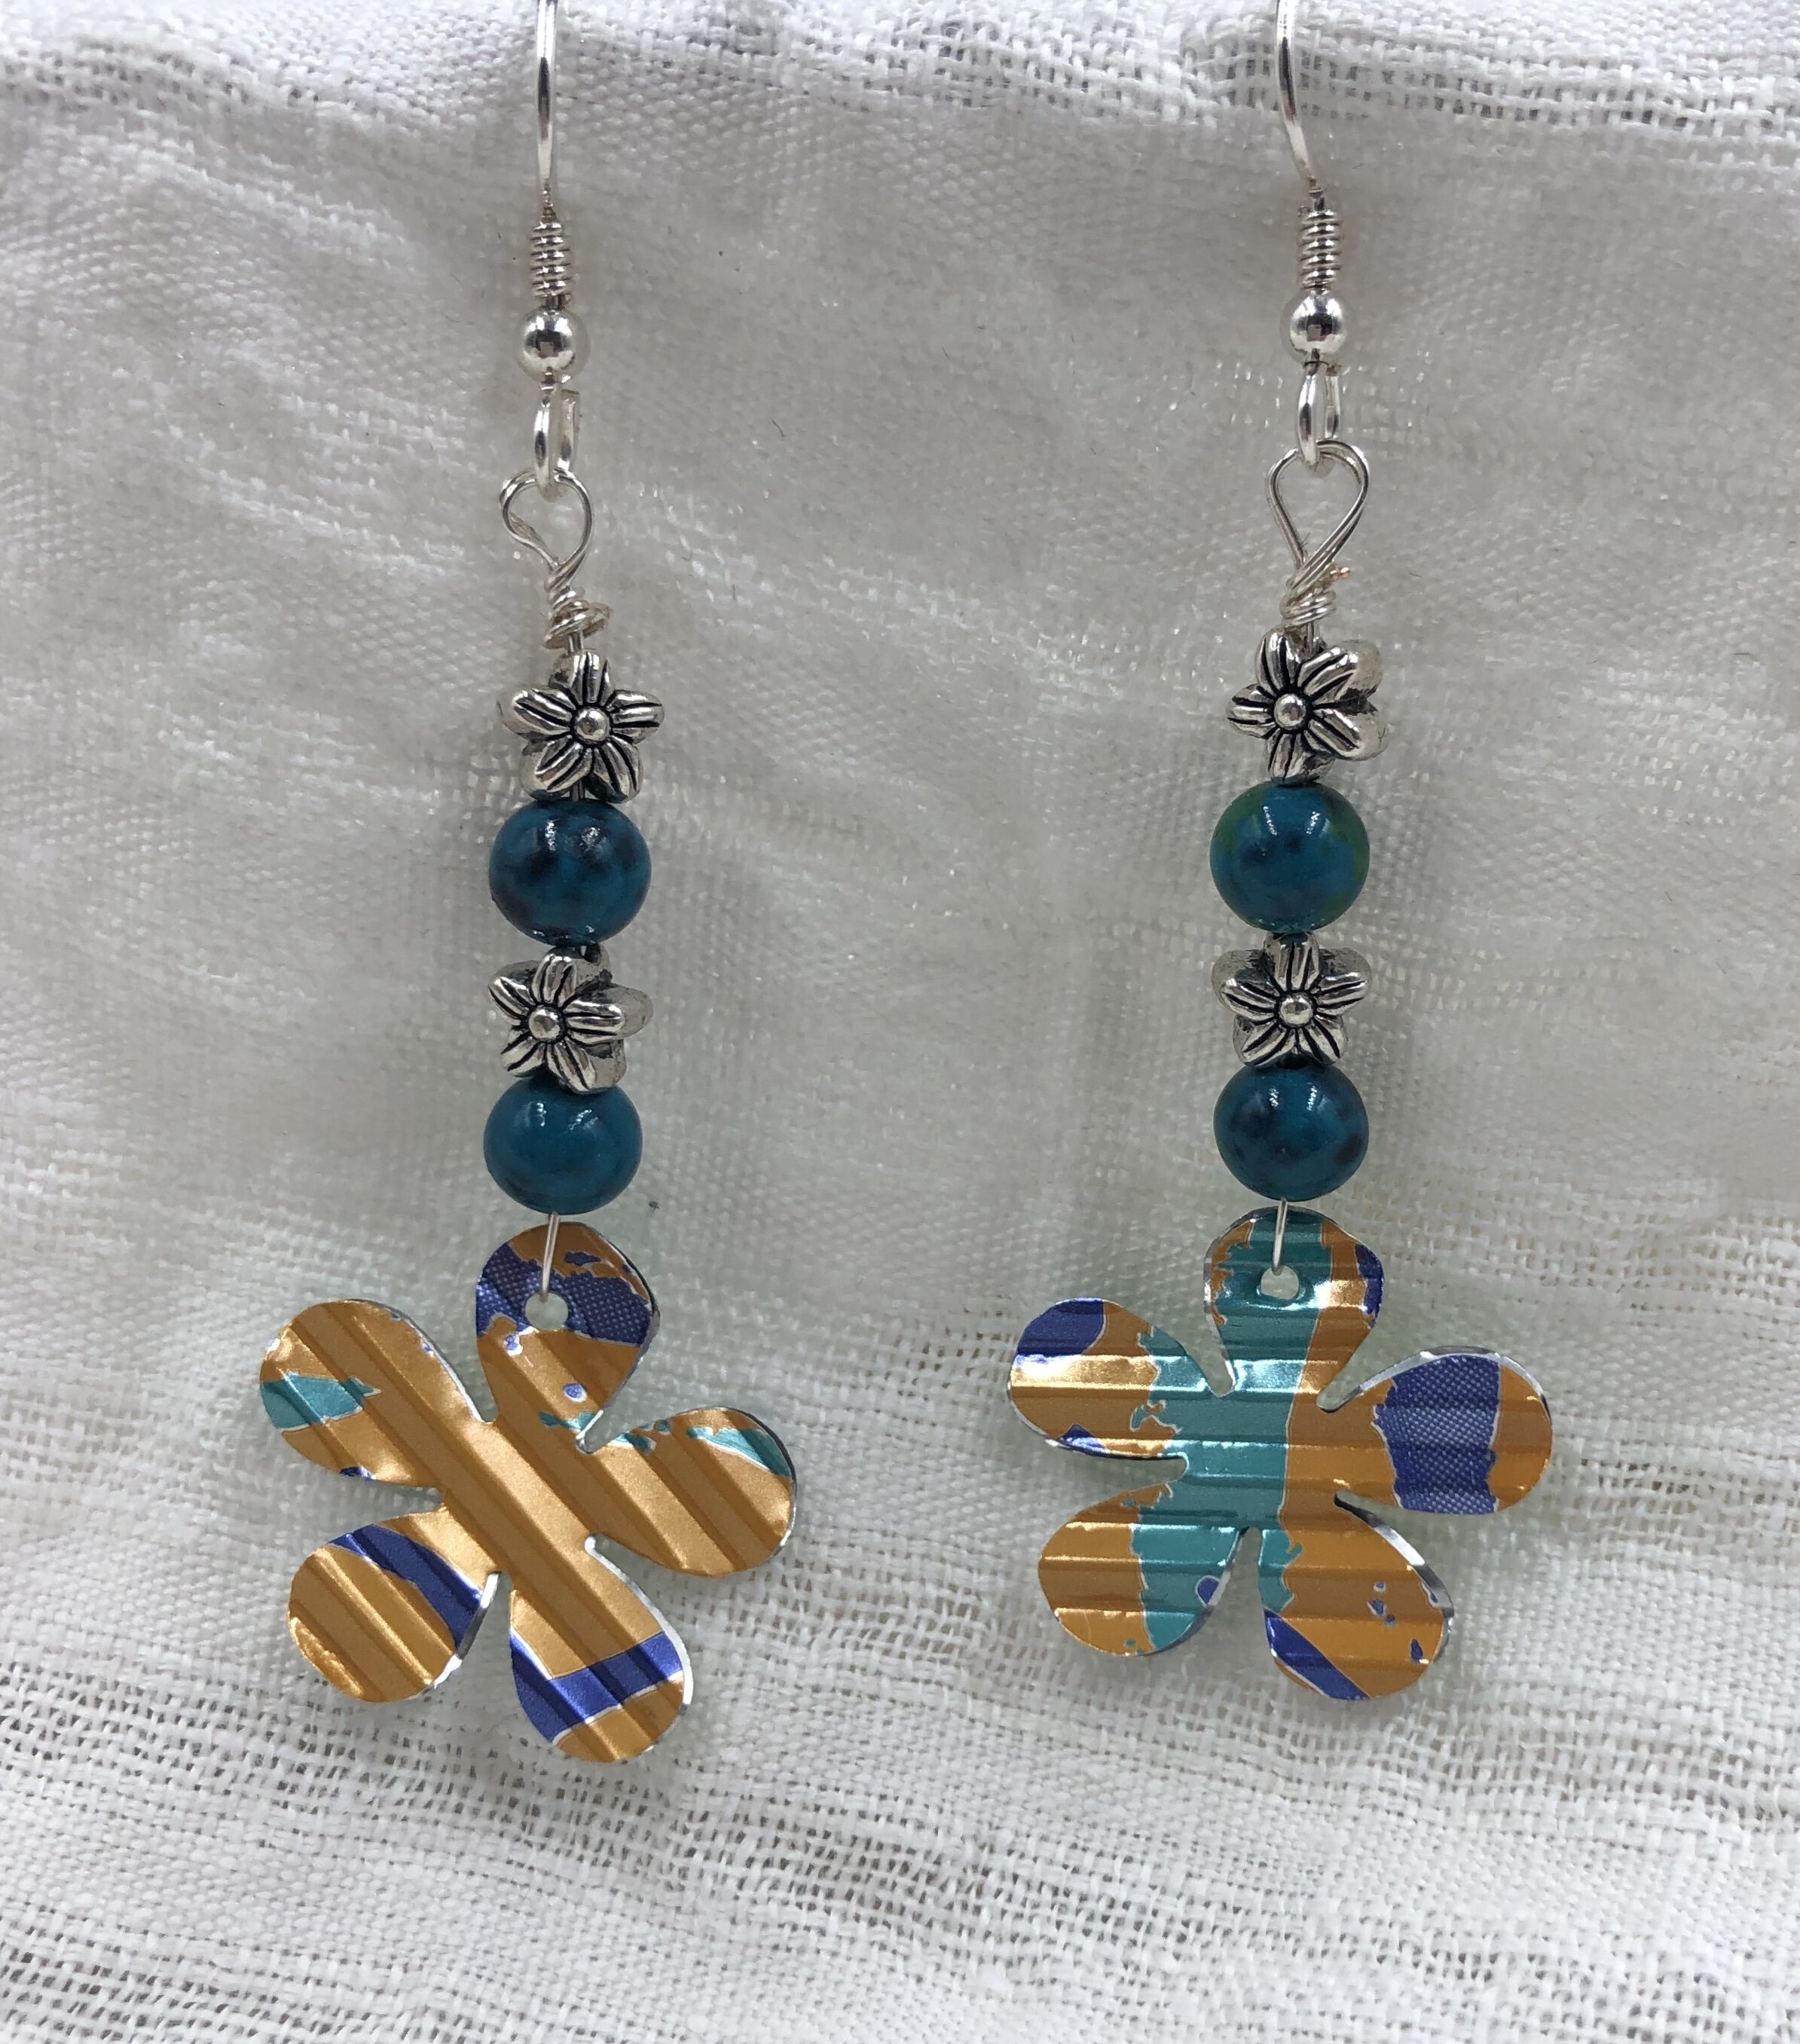 Up-cycled Aluminum, Sterling Earrings